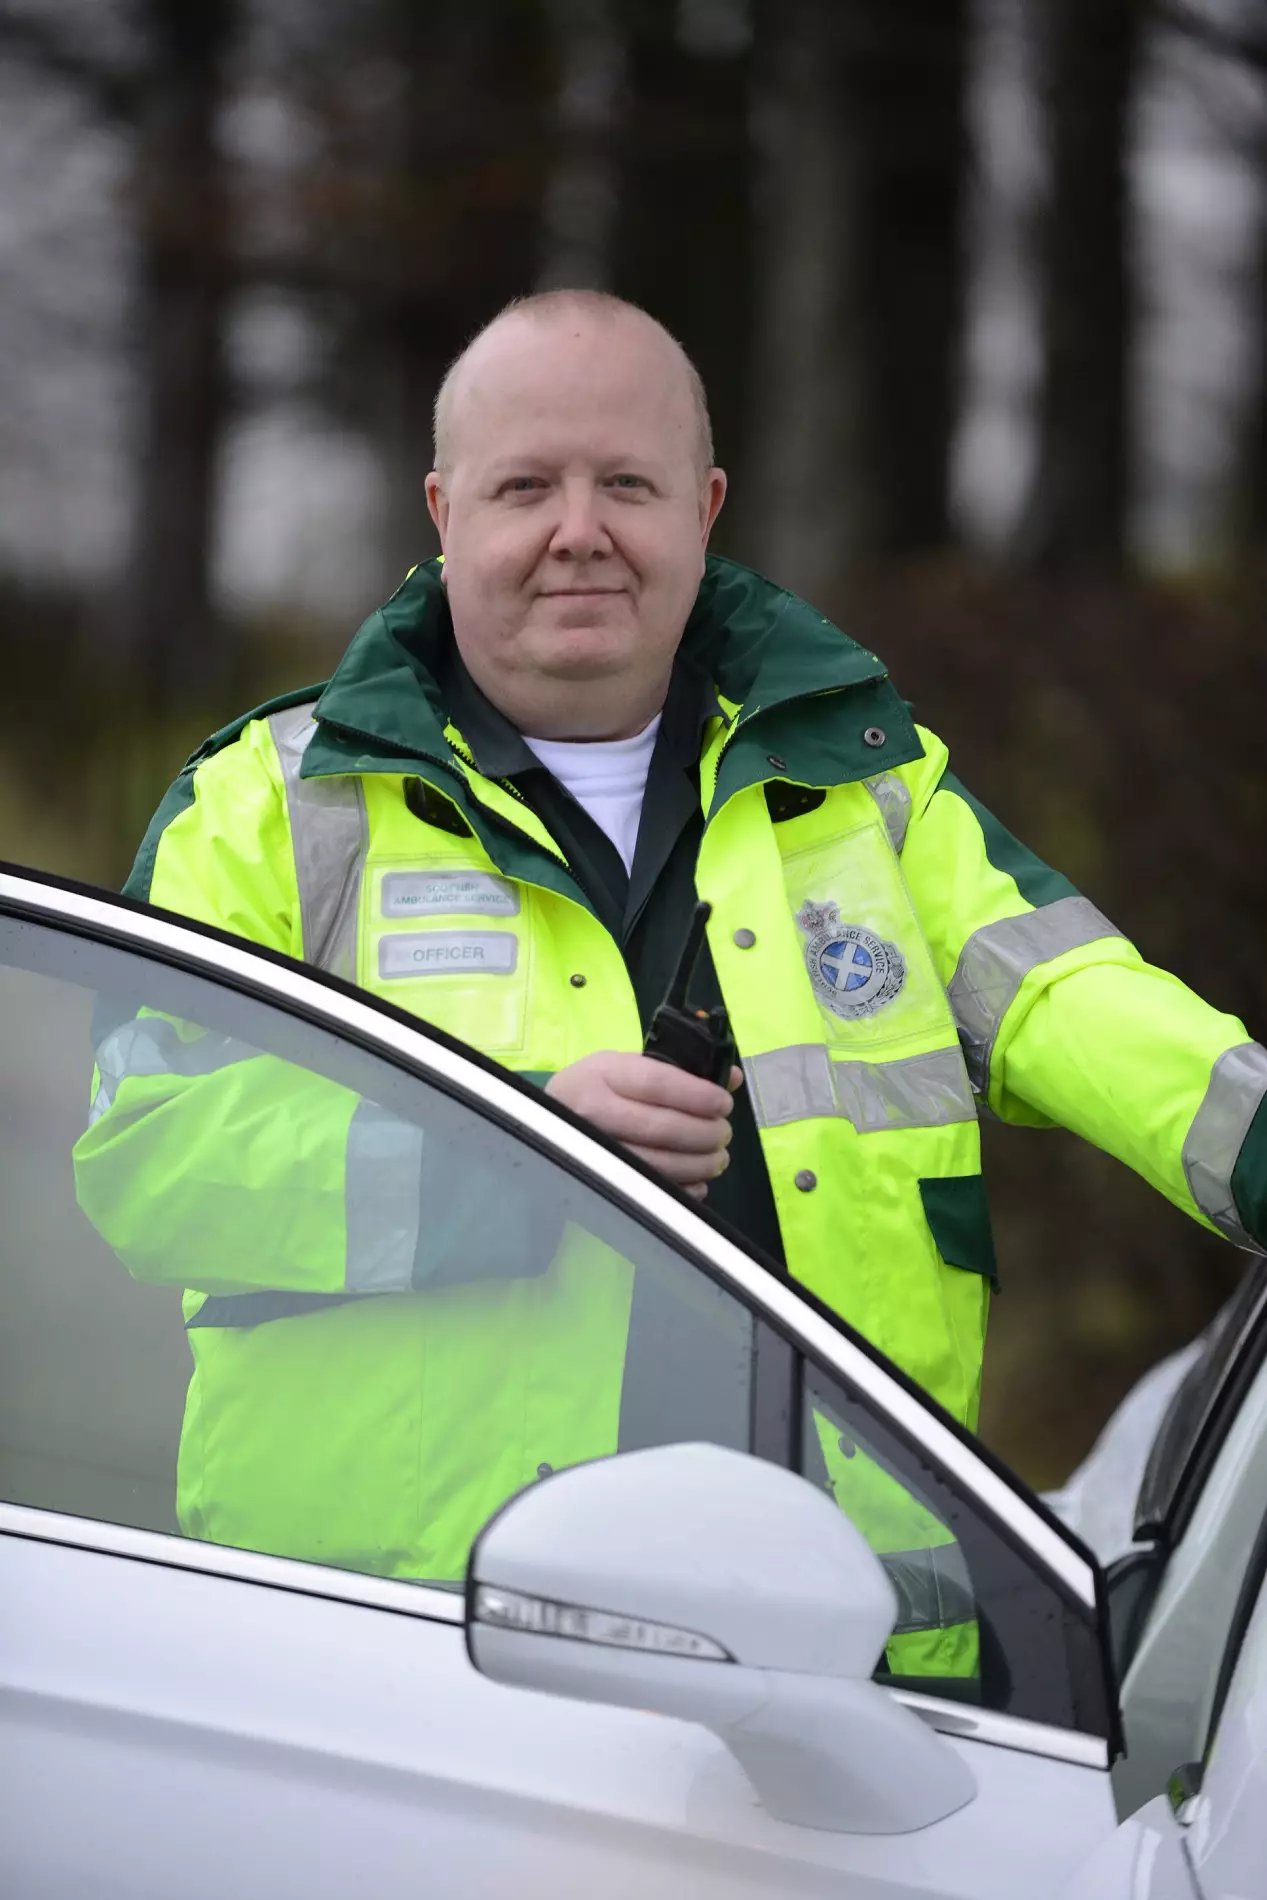 Paramedic Derek was only diagnosed after he began coughing up blood.